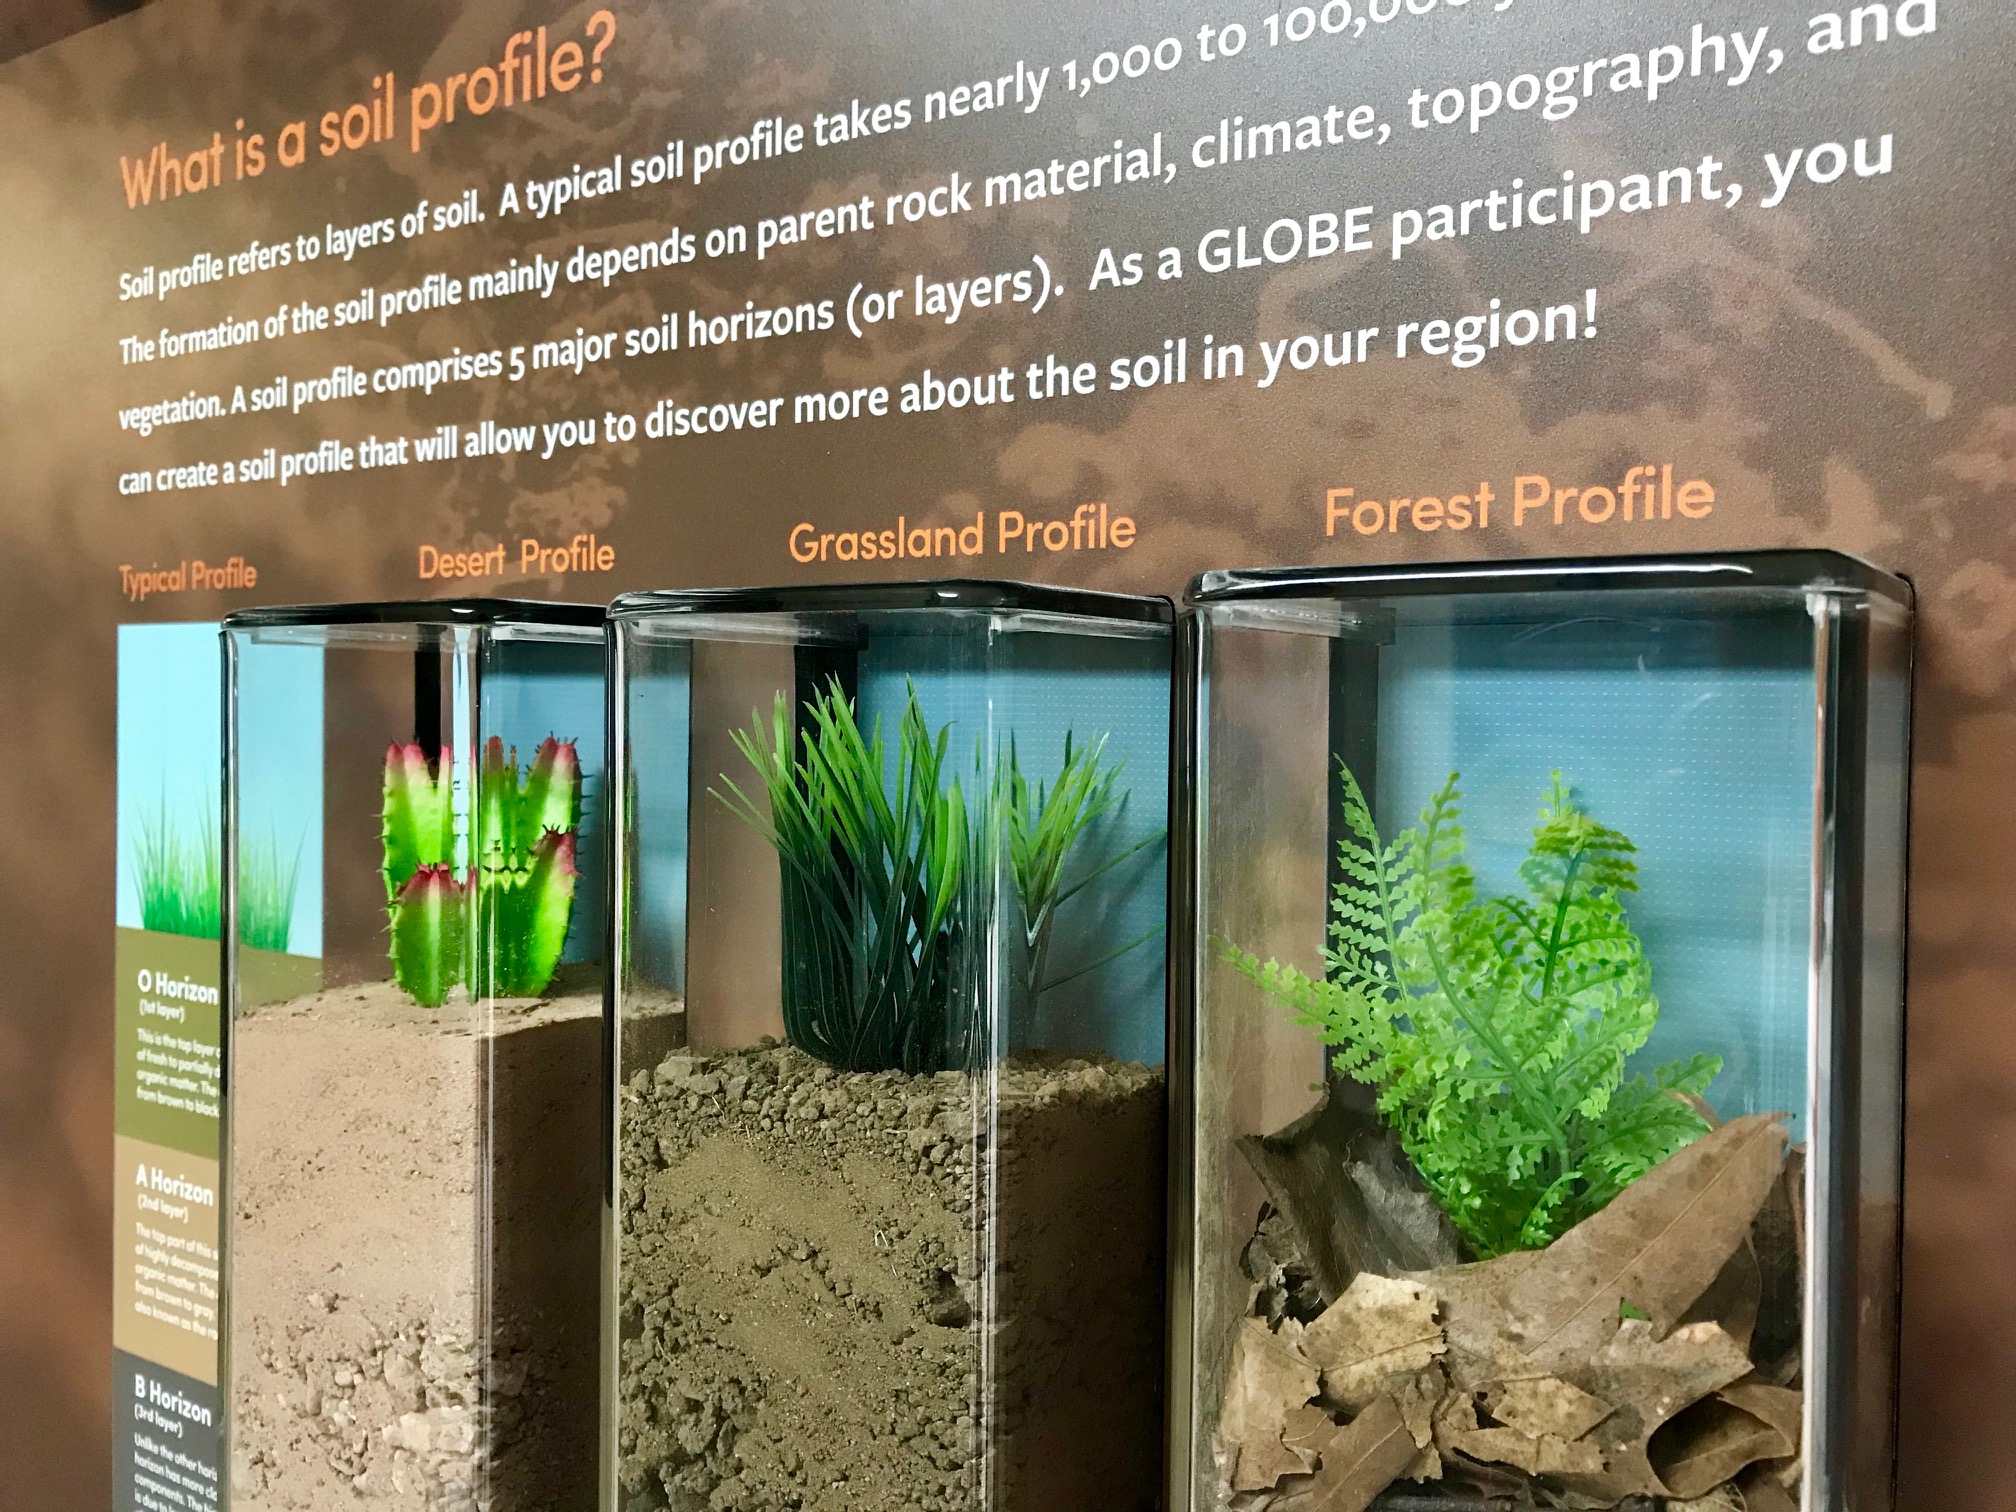 A close-up of a museum exhibit on Earth observation, showing three types of soil in glass cases with fake plants "growing" in them. On the left, a fake cactus stand in tan, fine-grained soil under the label "Desert Profile"; in the center box, fake grasses stand in coarser, green-brown soil labeled "Grassland Profile"; and in the right-most box, a fake fern grows in loosely packed brown leaf litter labeled "Forest Profile". Above the boxes, orange and white text stretches across a brown wall panel.